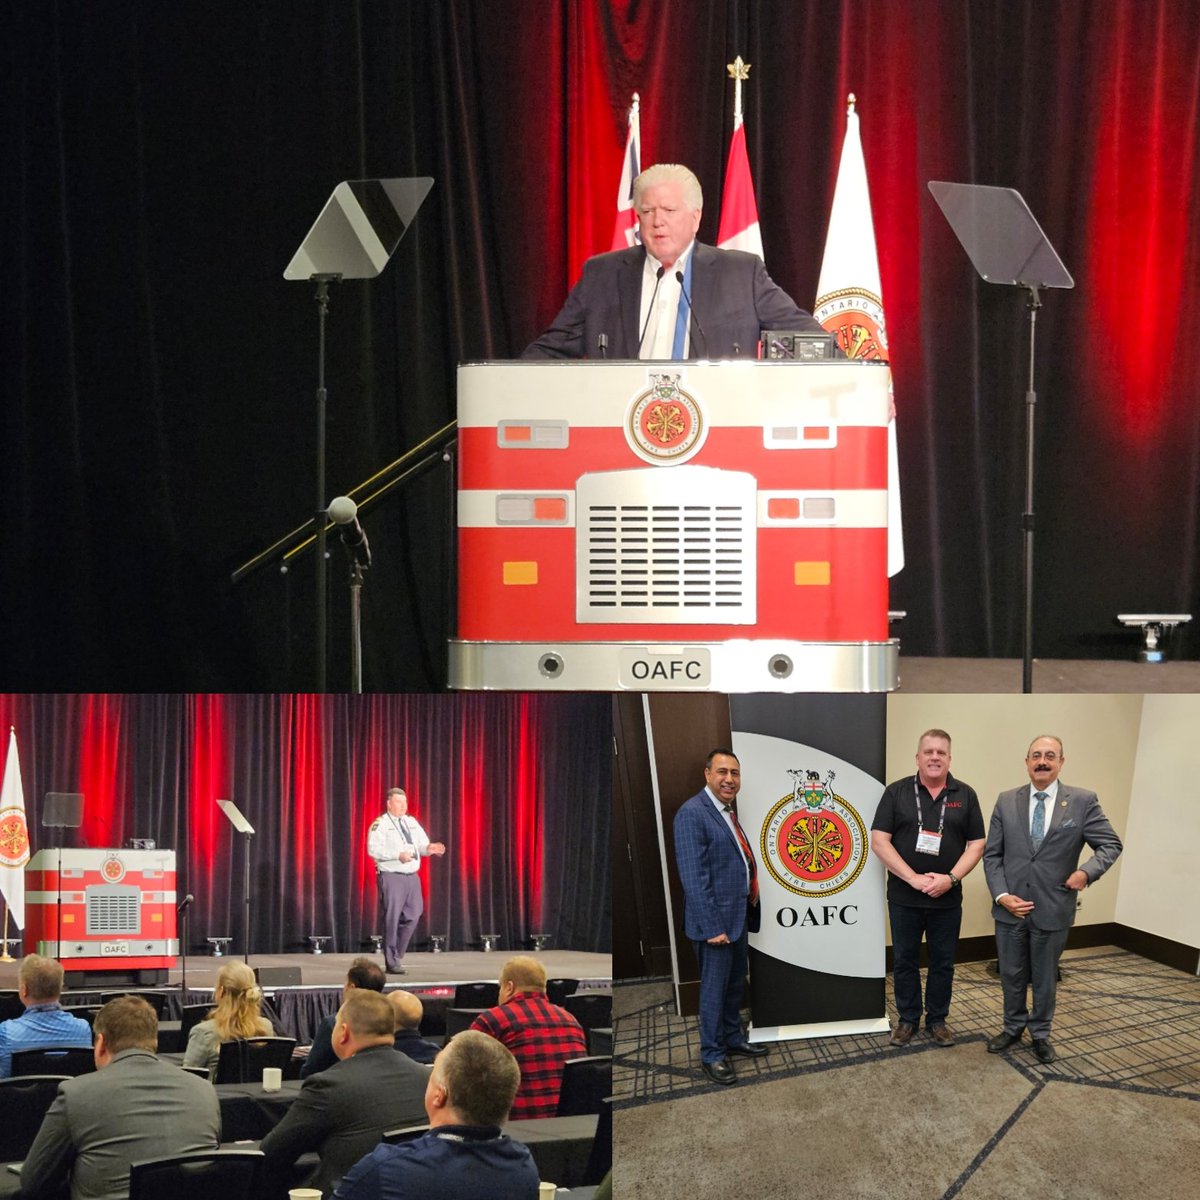 And that is a wrap on the 2024 OAFC Conference and Trade Show. Thank you to all our attendees, exhibitors, speakers, and sponsors. We hope to see everyone at our next OAFC event. #oafc2024